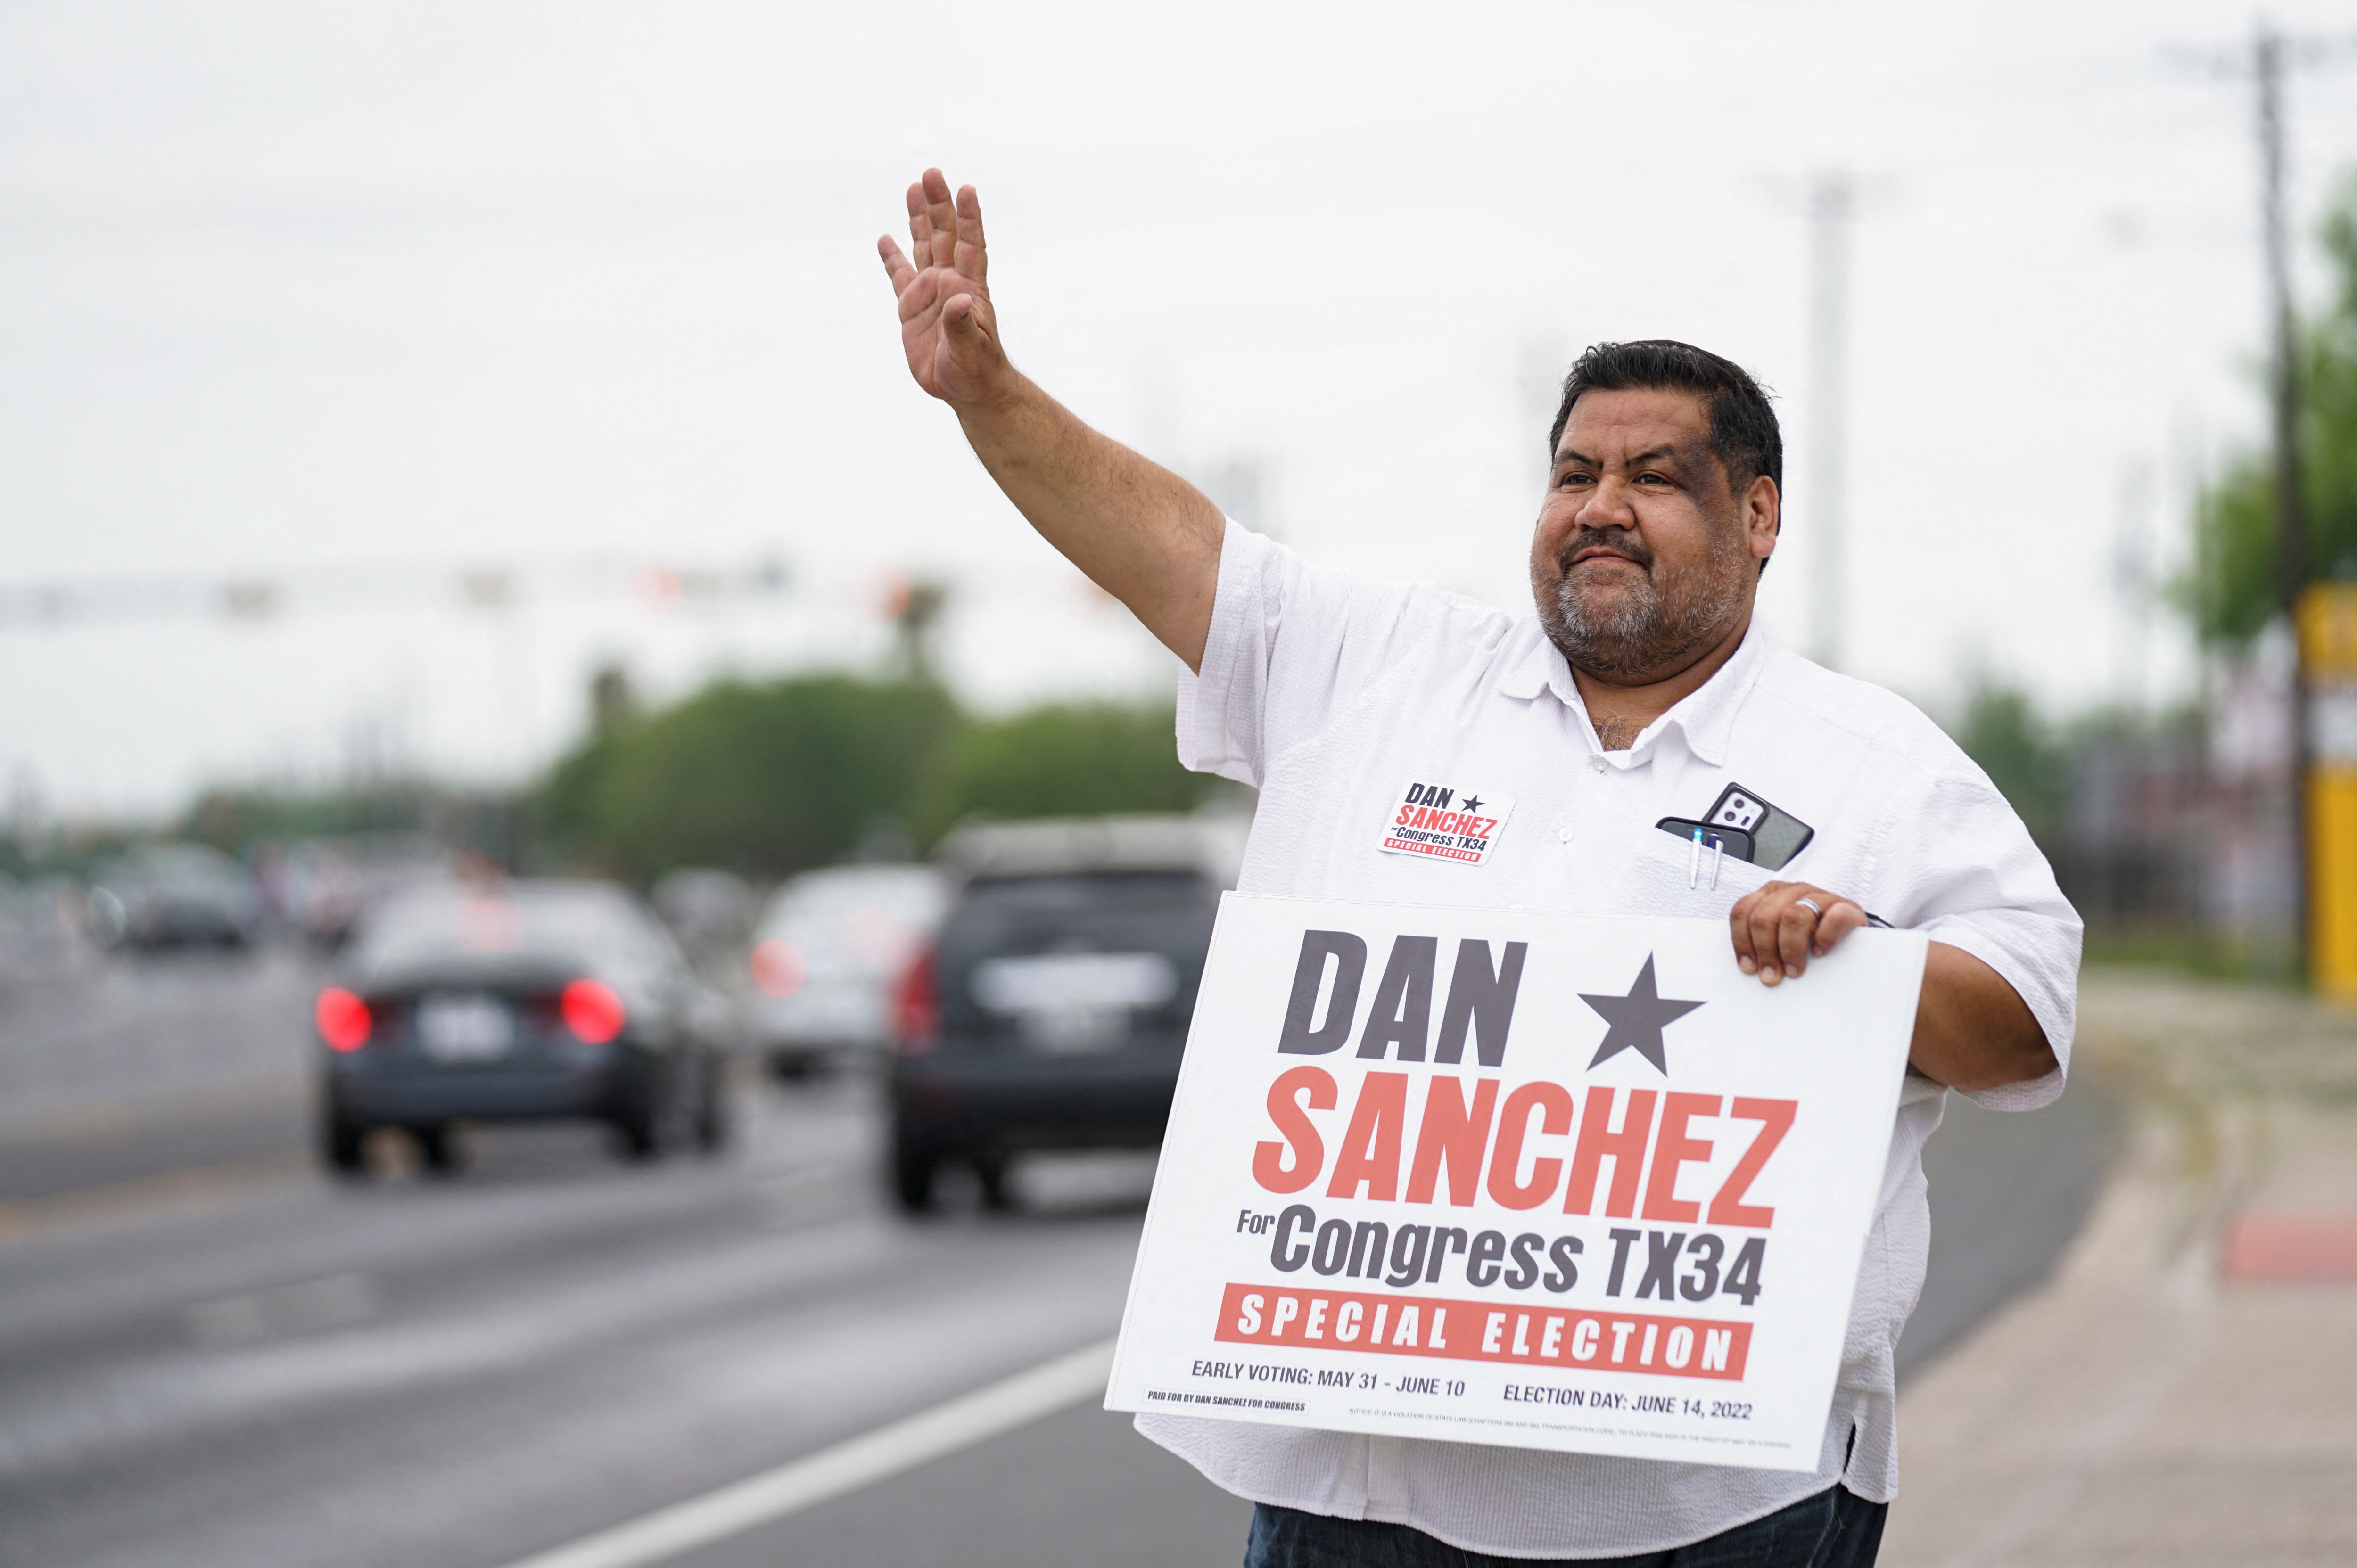 Democrat Dan Sanchez, who running for the vacant 34th congressional district seat, waves at motorists passing by a polling site in Brownsville, Texas, U.S., June 14, 2022. REUTERS/Veronica G. Cardenas